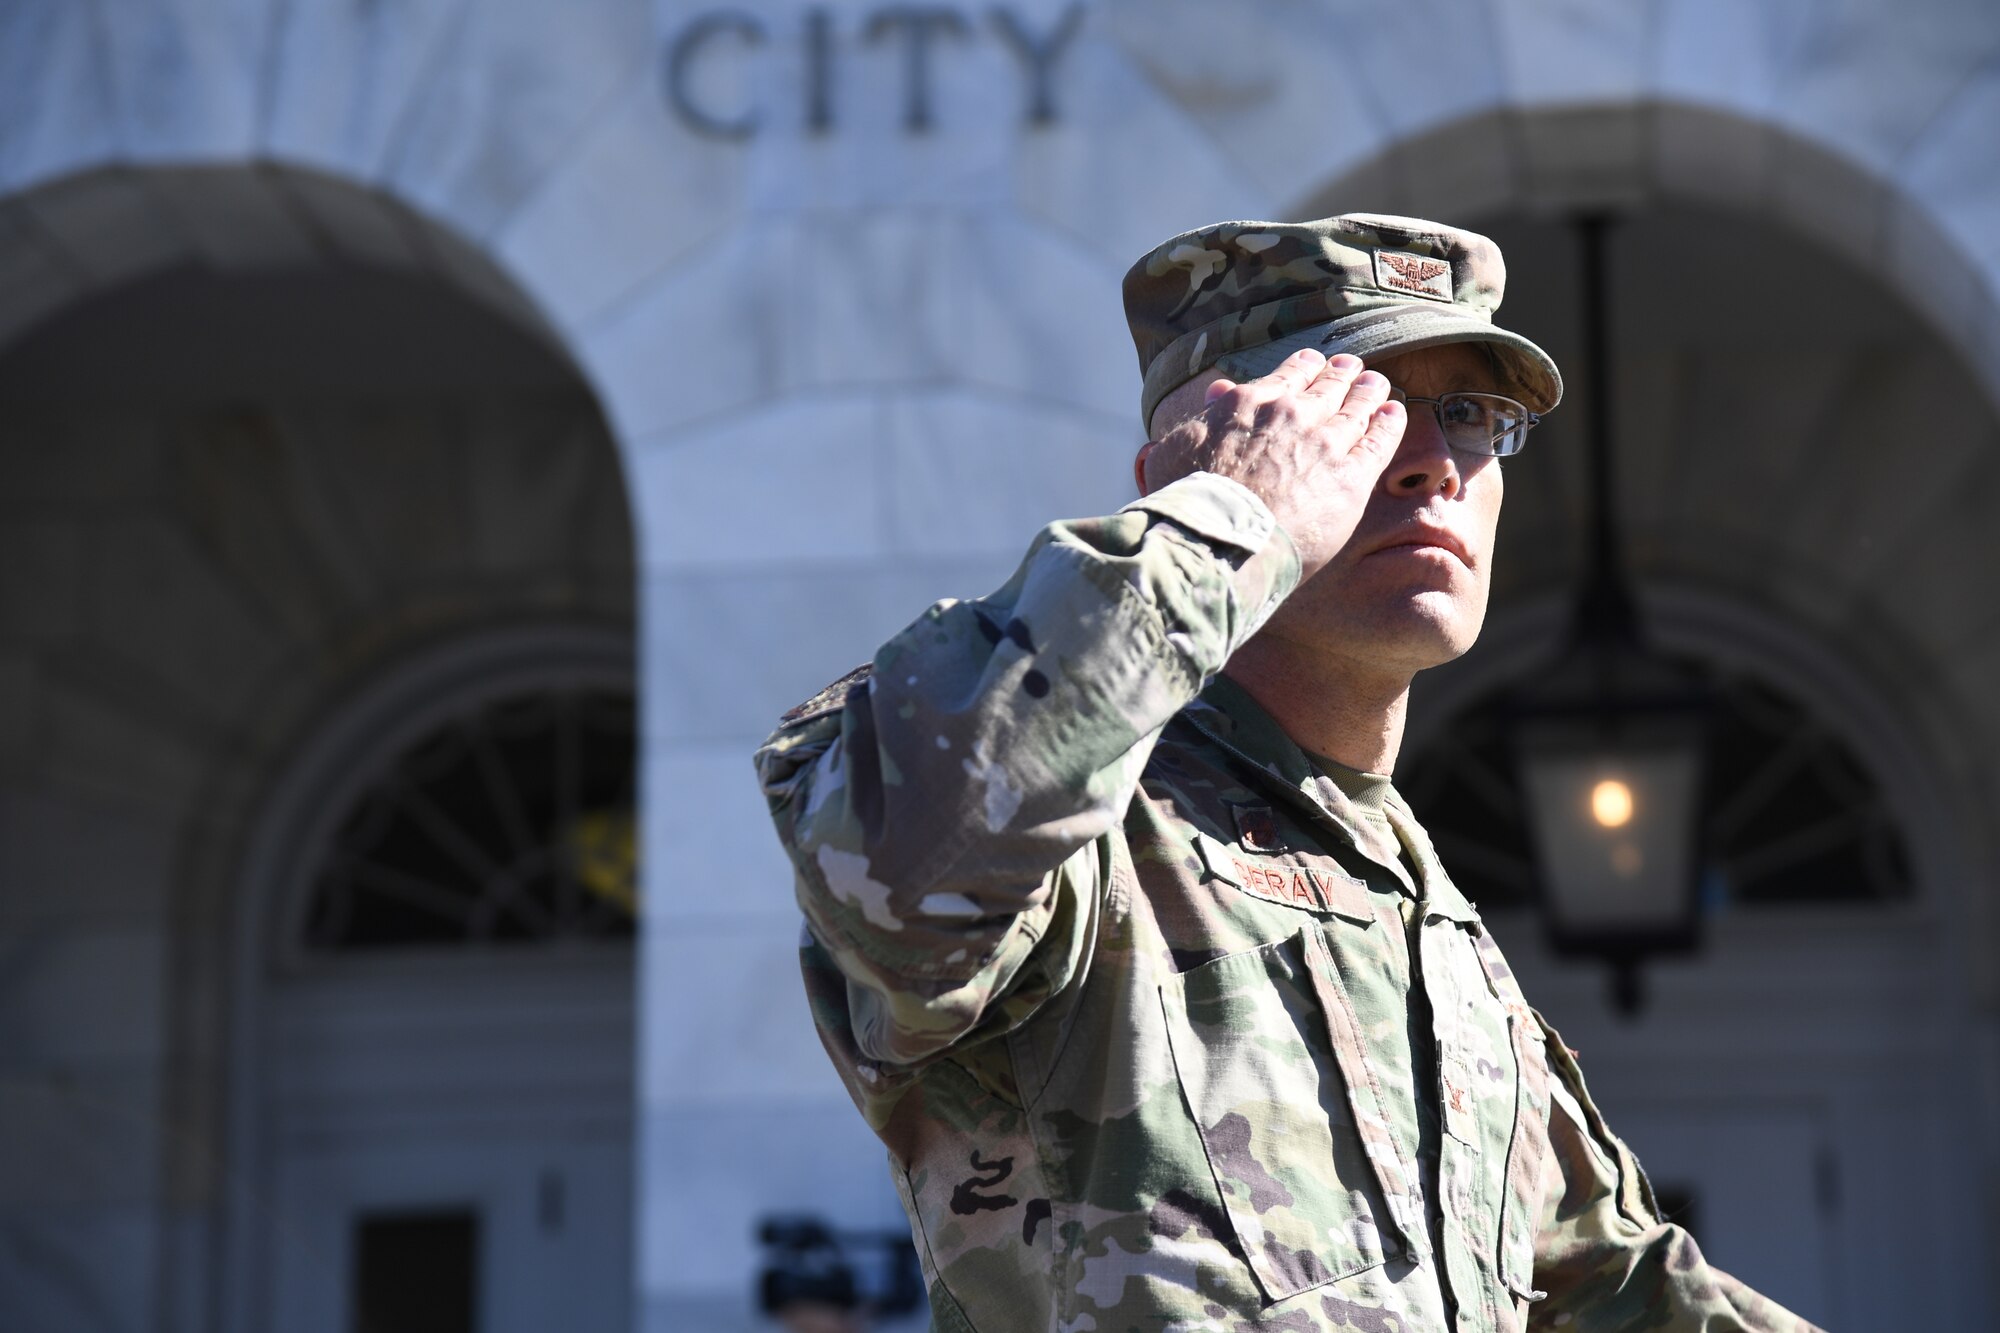 U.S. Air Force Col. Chance Geray, 81st Training Group commander, renders a salute during the 21st Annual Gulf Coast Veterans Day Parade in Biloxi, Mississippi, Nov. 6, 2021. Keesler Air Force Base leadership, along with hundreds of Airmen, attended and participated in the parade in support of all veterans, past and present. More than 50 unique floats, marching bands and military units marched in the largest Veterans Day parade on the Gulf Coast. (U.S. Air Force photo by Kemberly Groue)